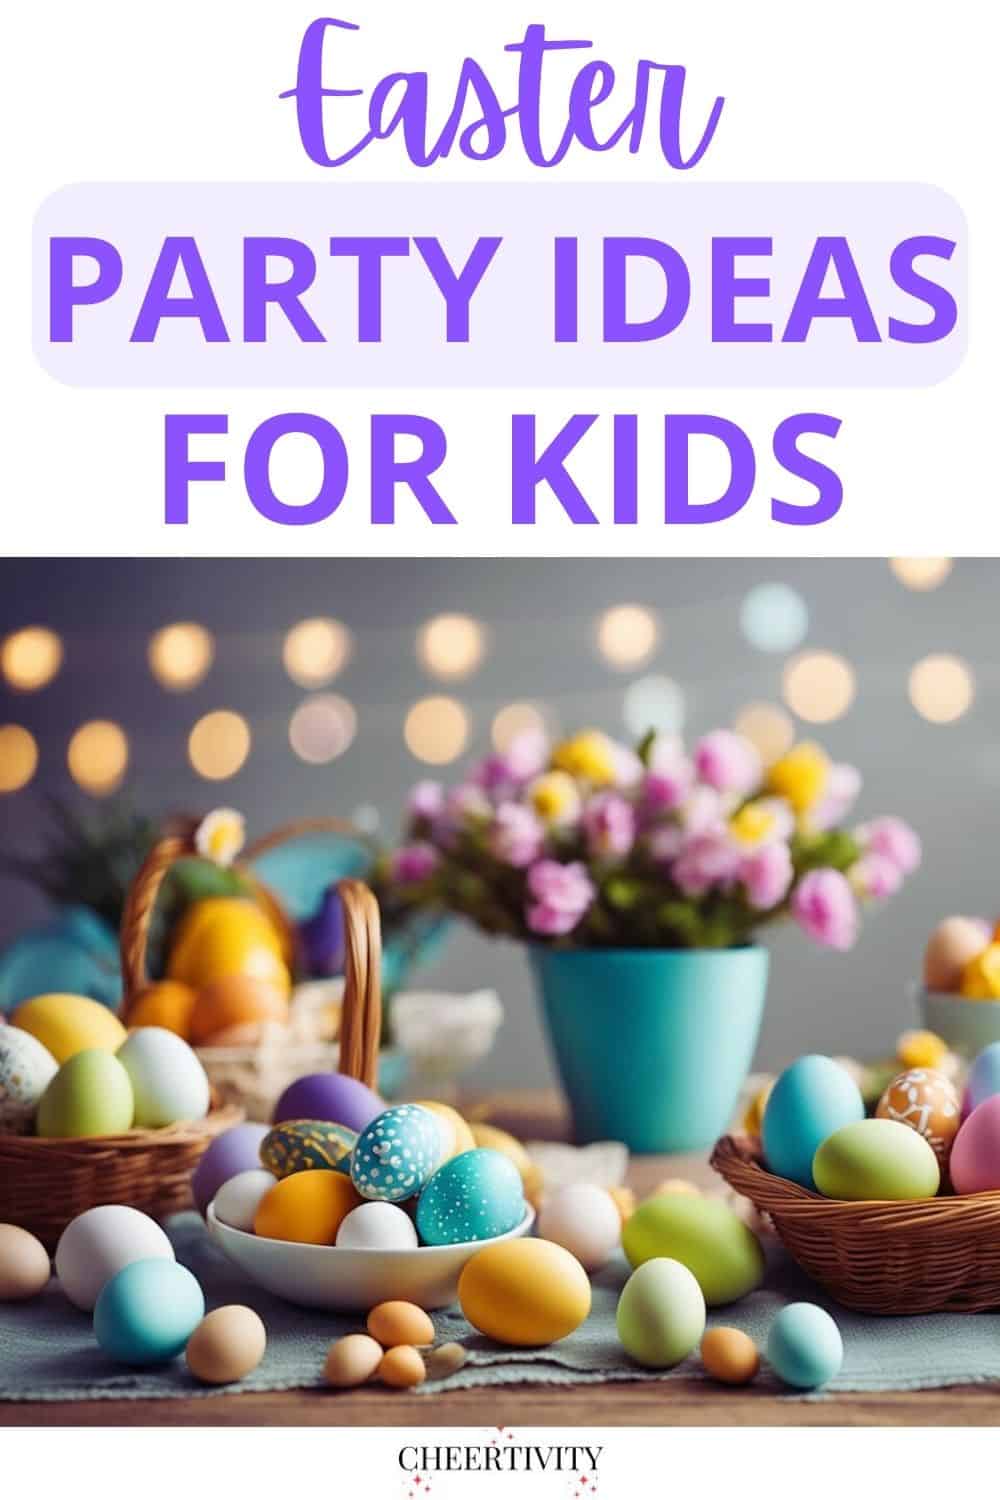 Top Easter Party Ideas for Kids